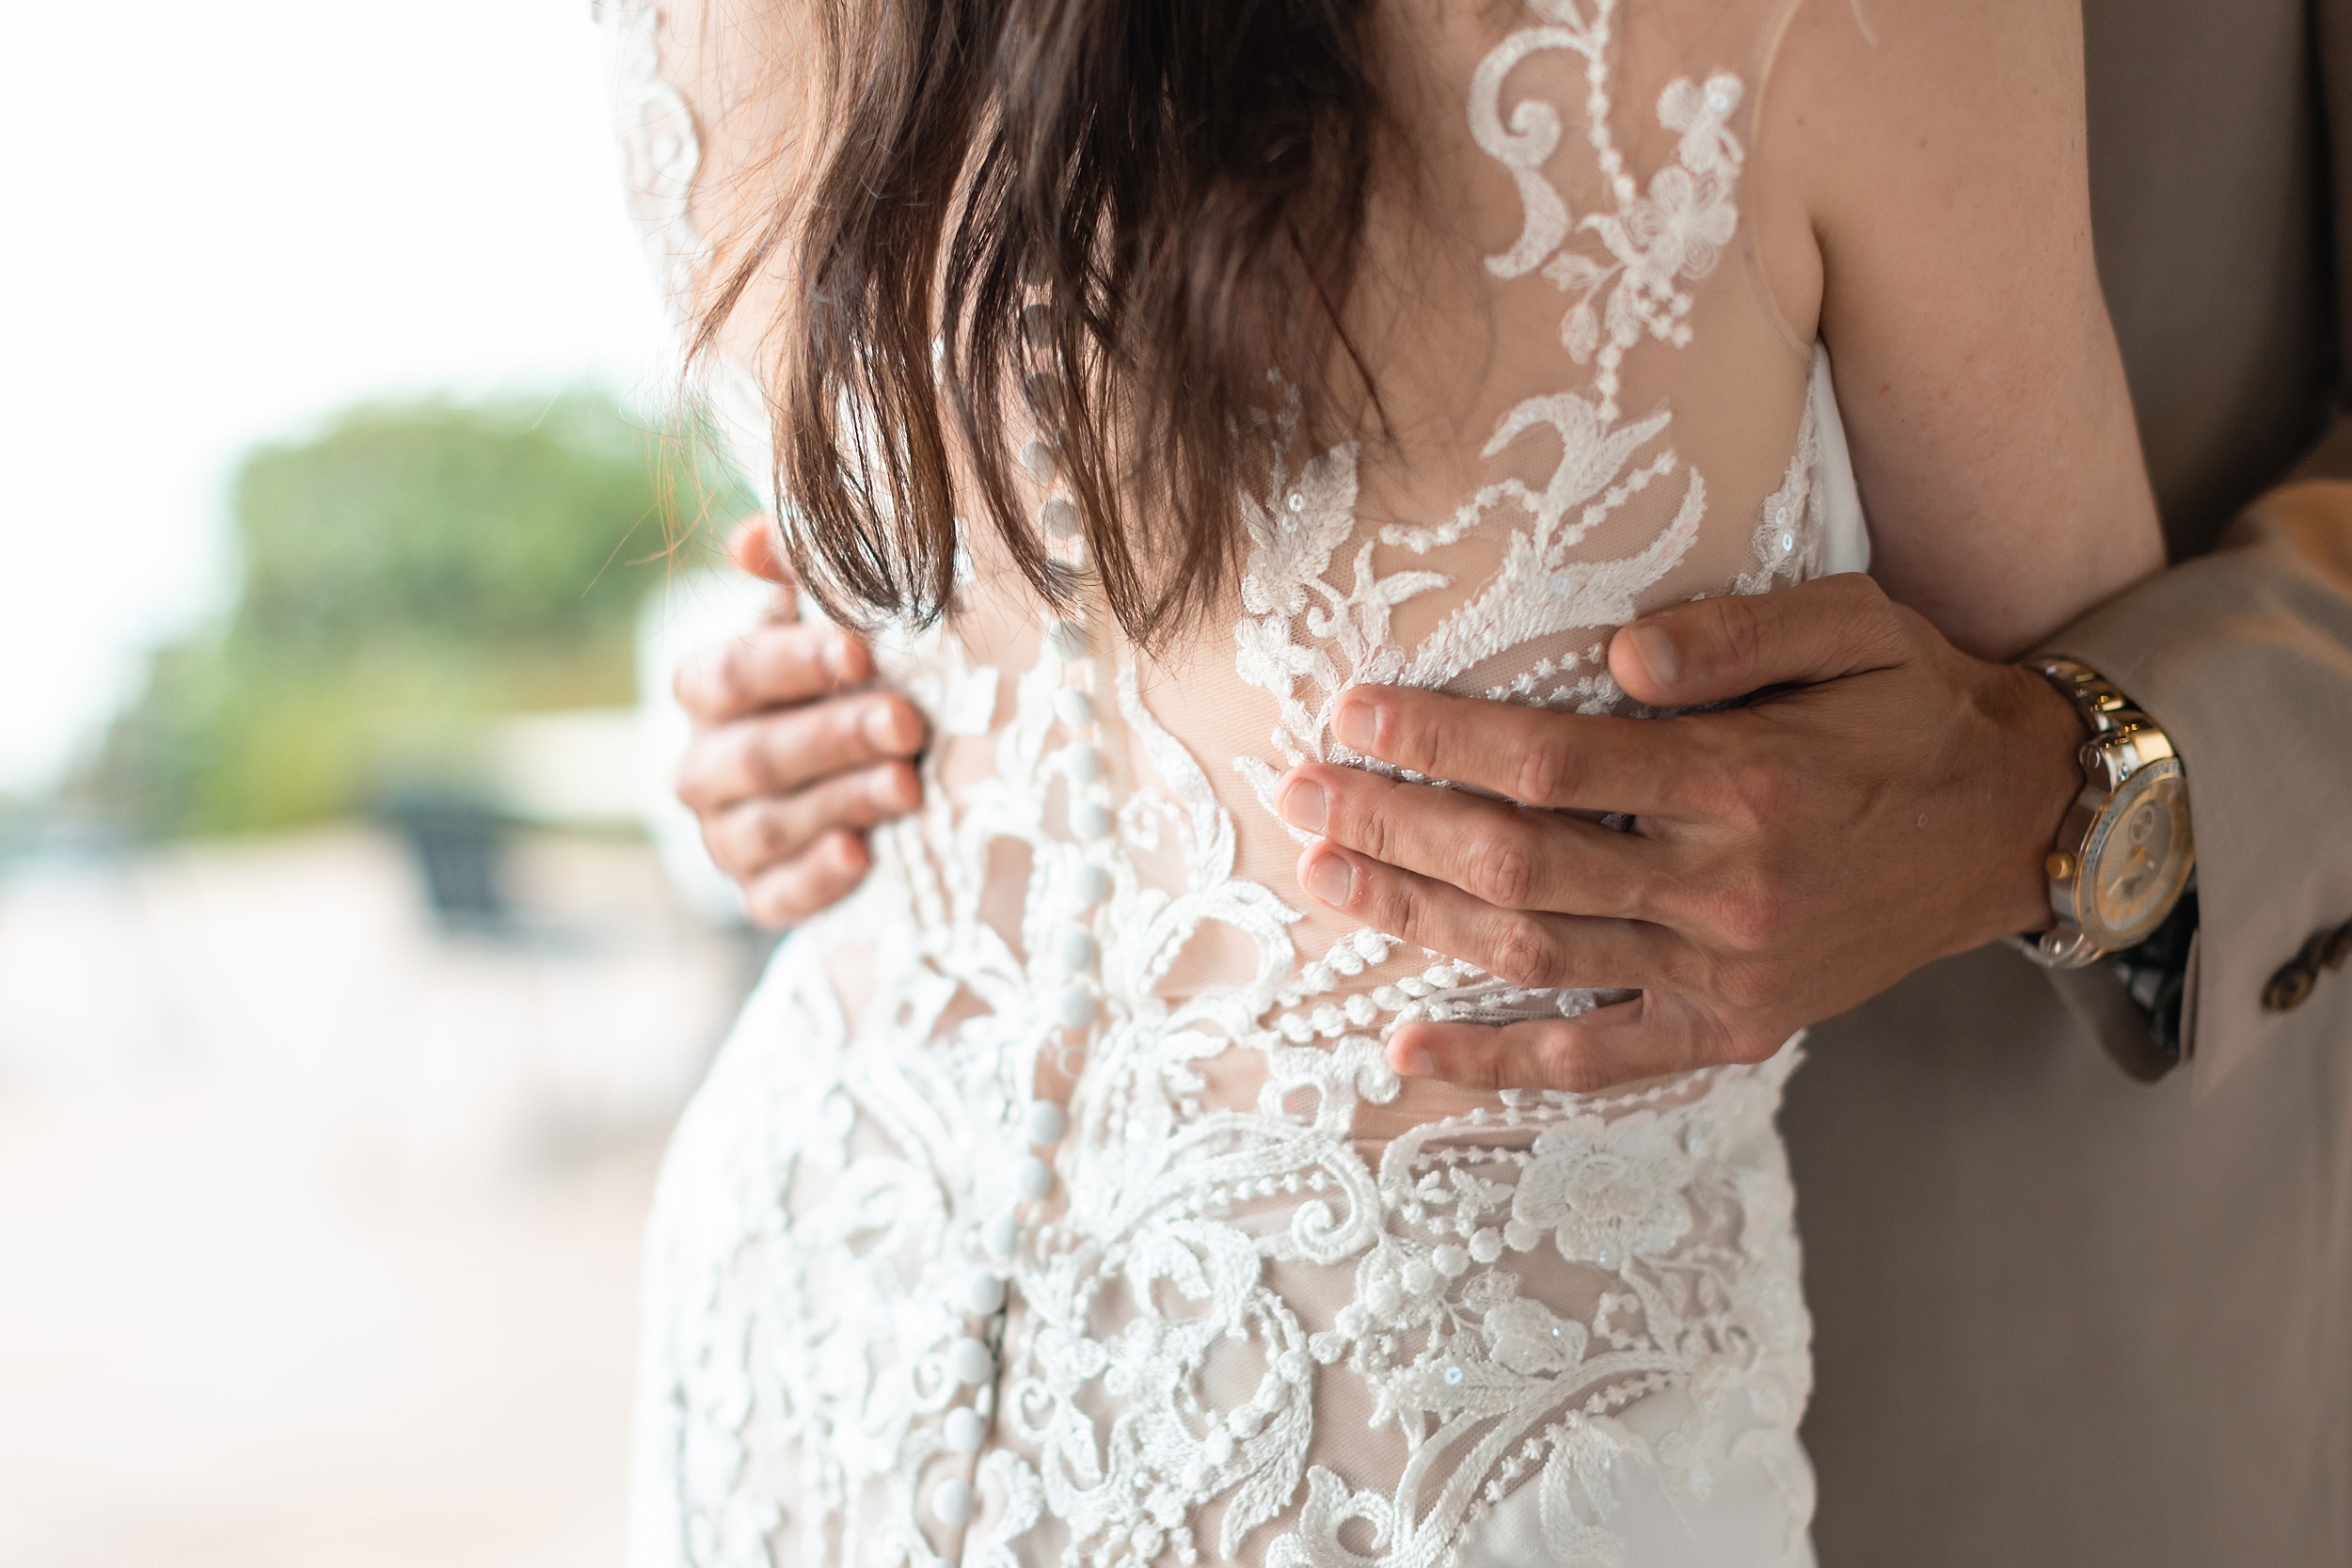 Details of a bride's embroidered lace dress while hugging her groom at their bramble tree estate wedding